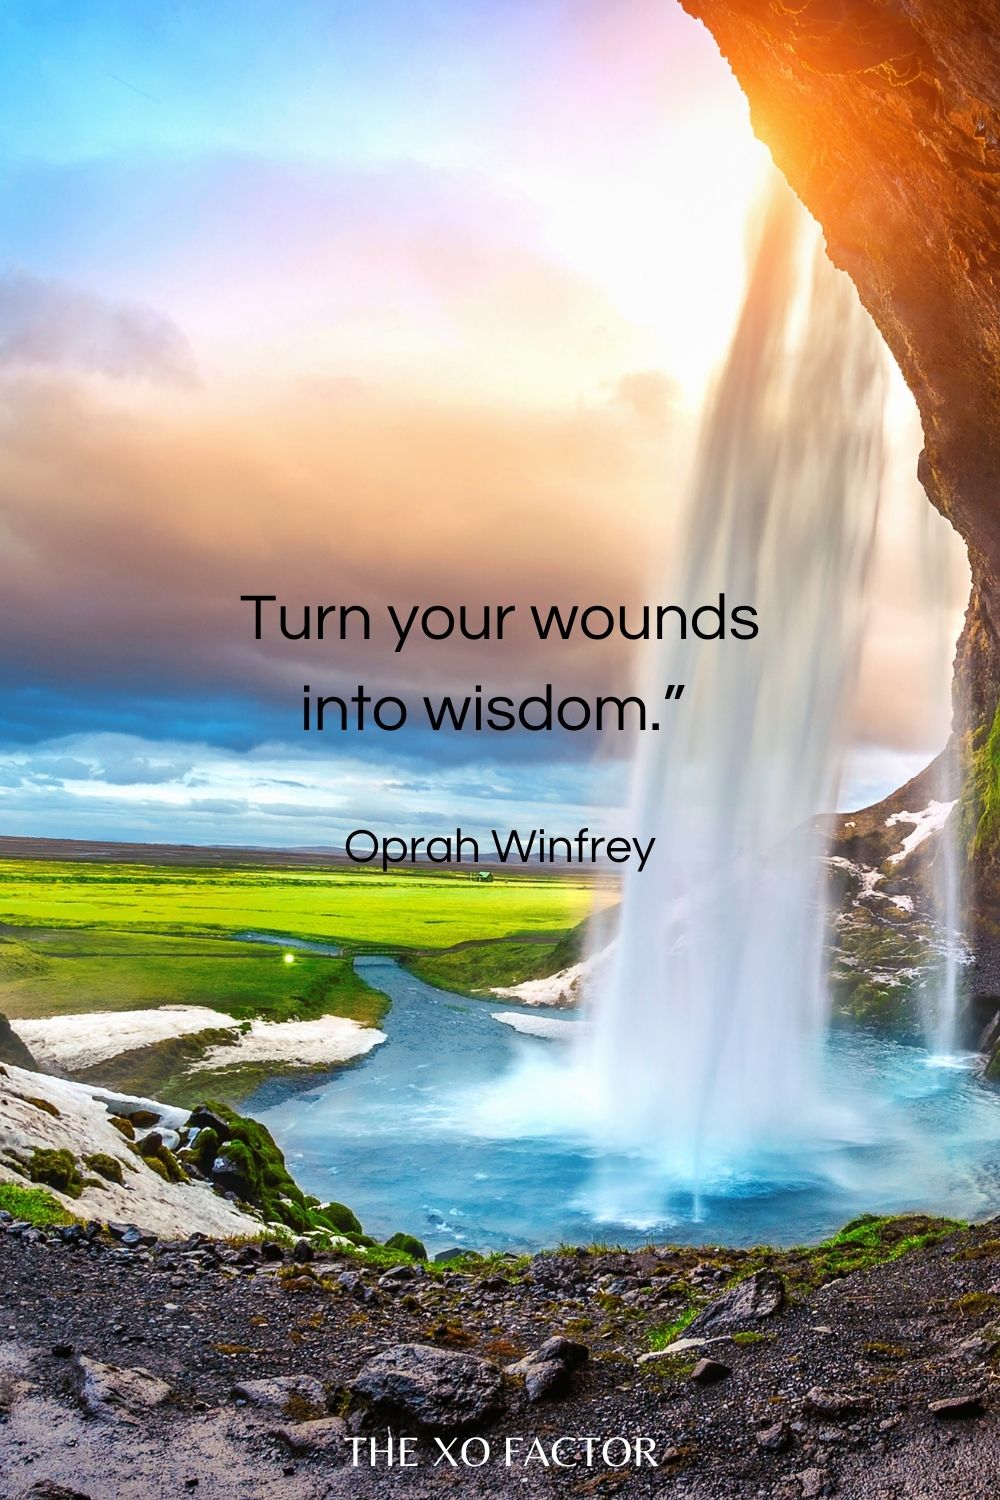 Turn your wounds into wisdom.”  Oprah Winfrey life quotes by famous people